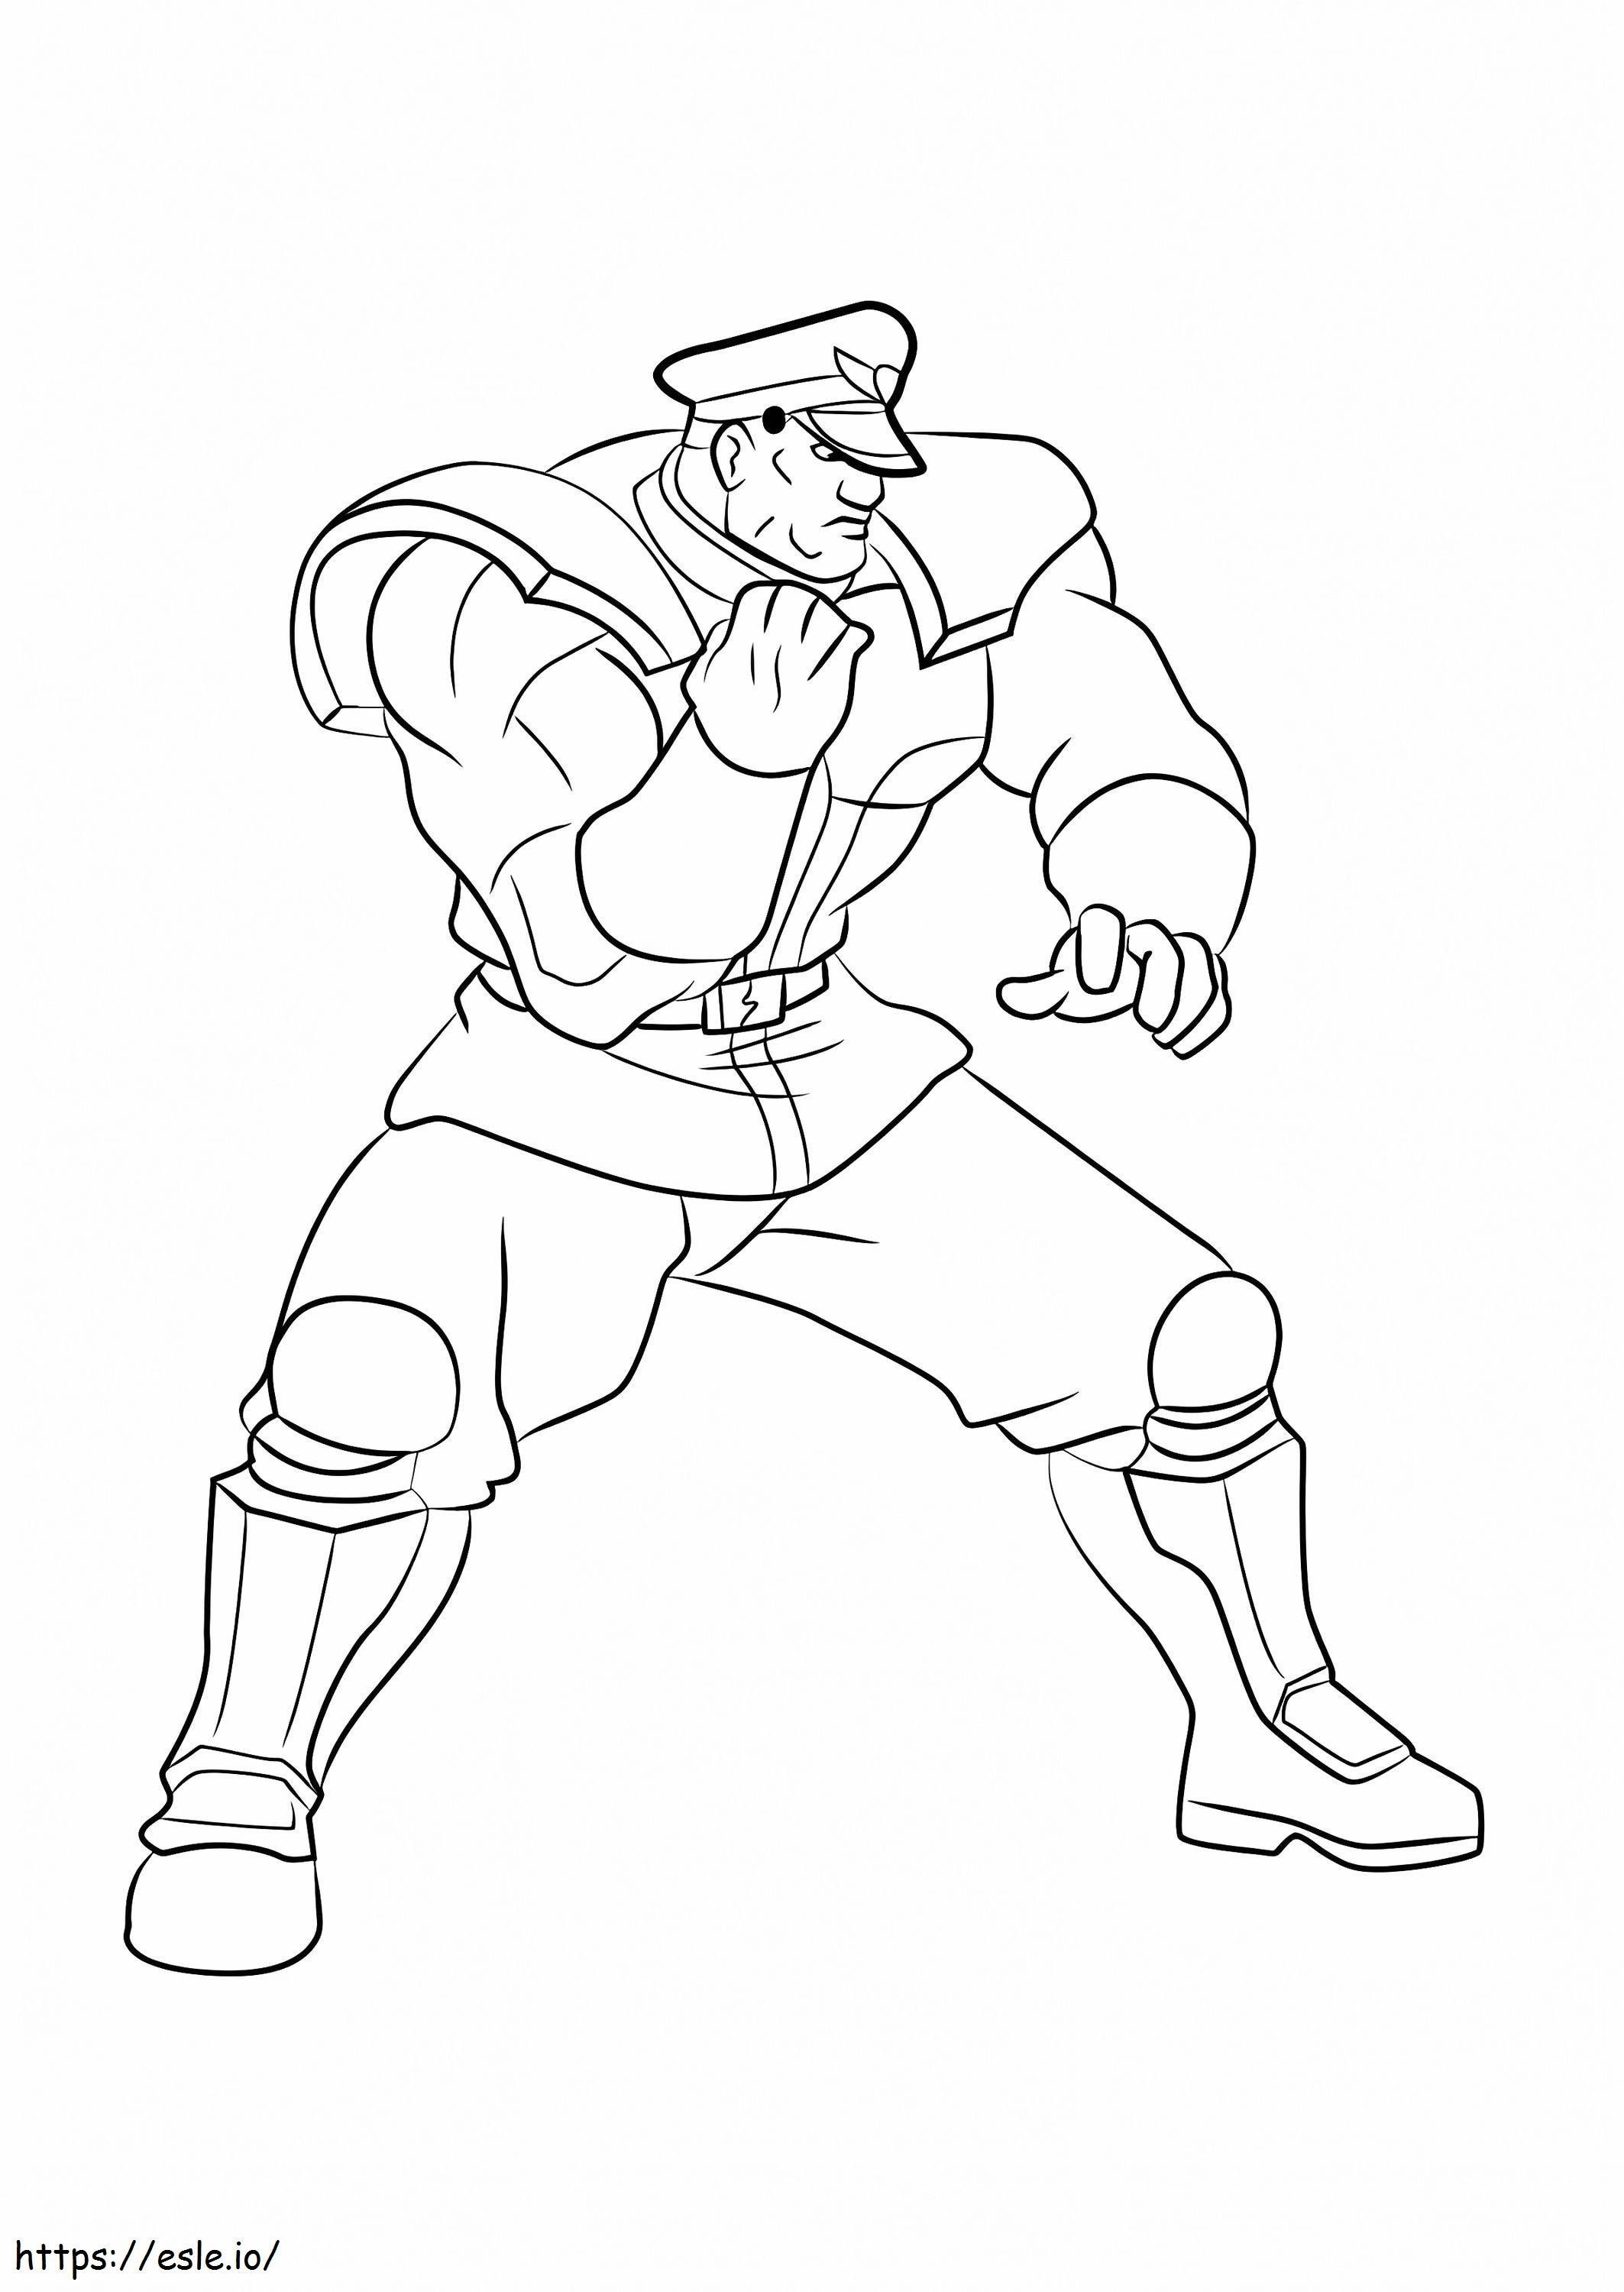 M. Bison From Street Fighter coloring page